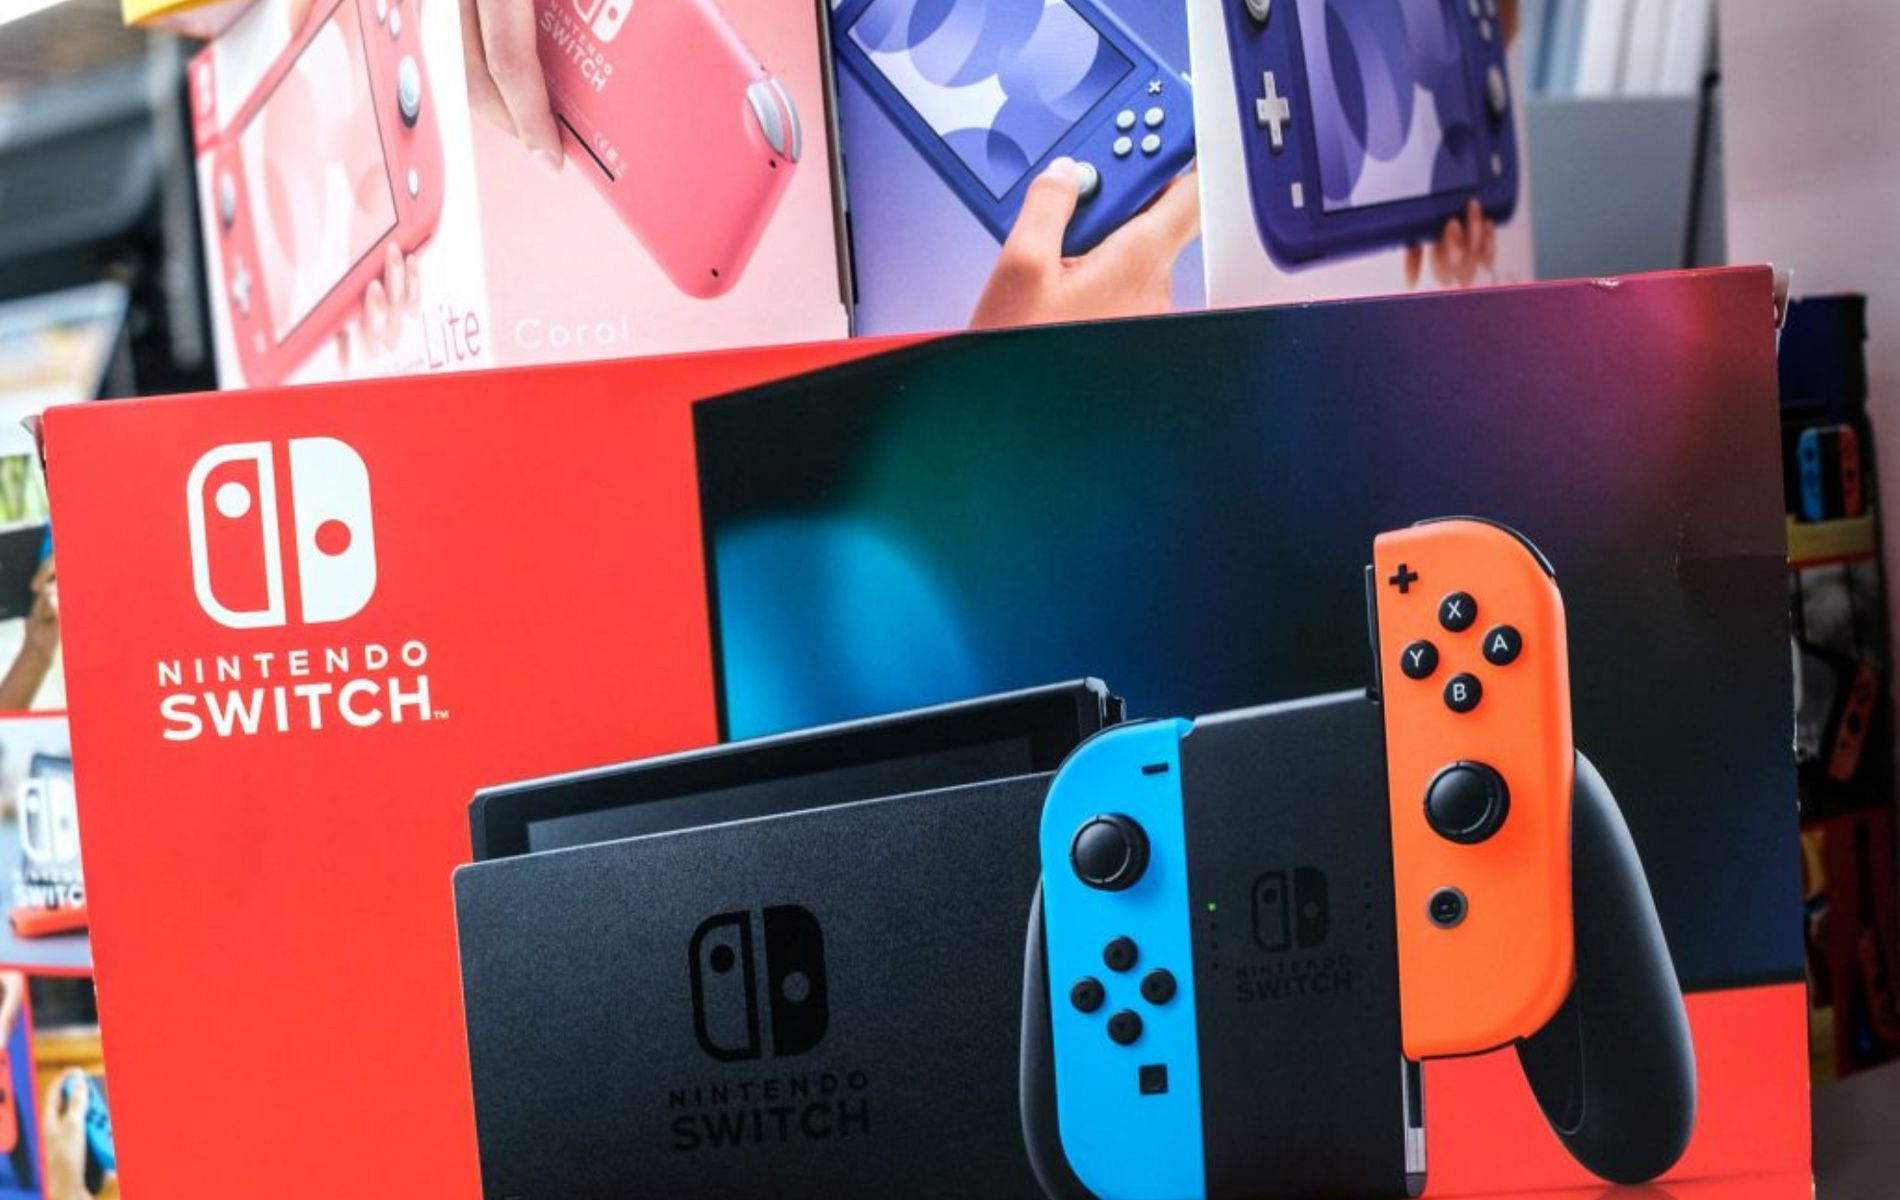 Stock art featuring Nntendo Switch boxart with standard and Lite models